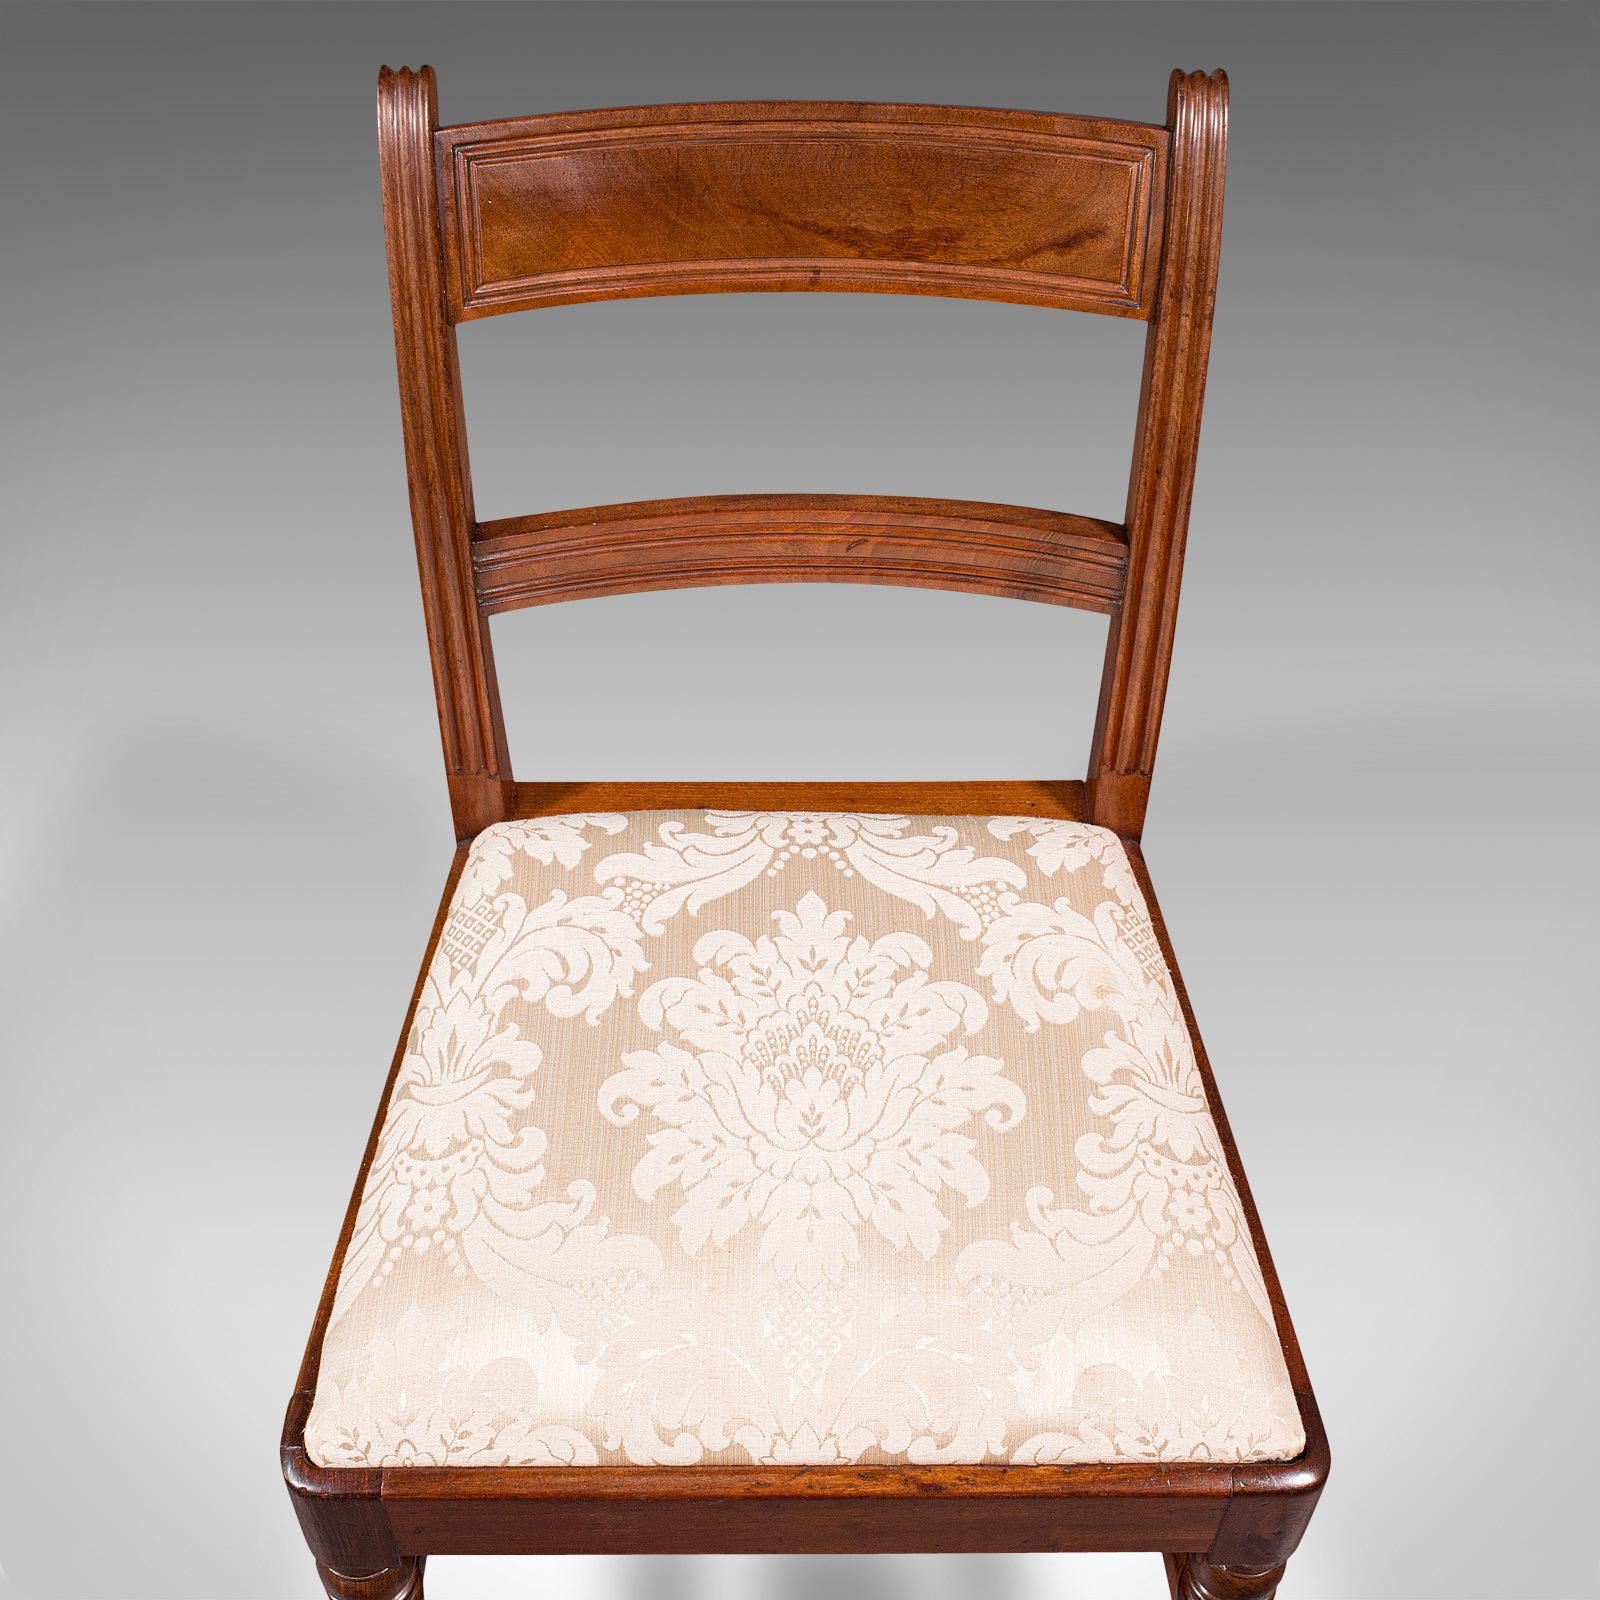 Set of 4, Antique Dining Chairs, English, Mahogany, Pair of Carvers, Regency 6